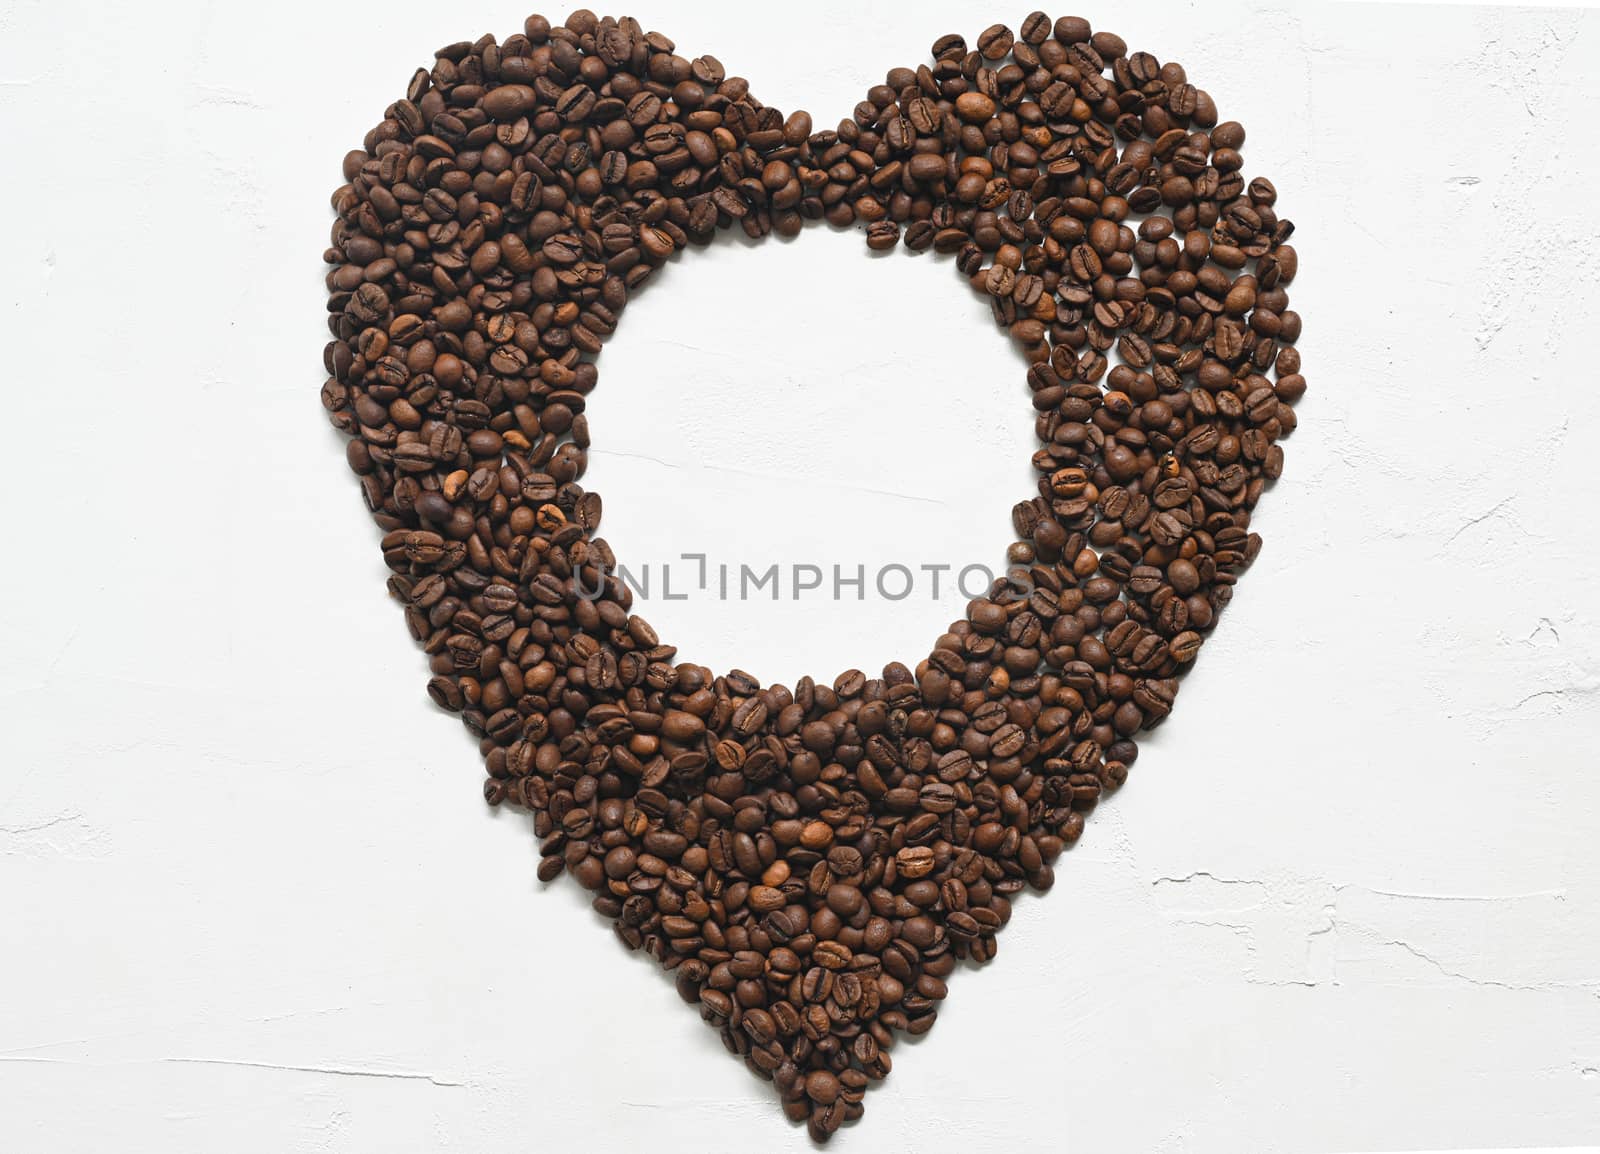 Heart made out of coffee beans on white background by sashokddt